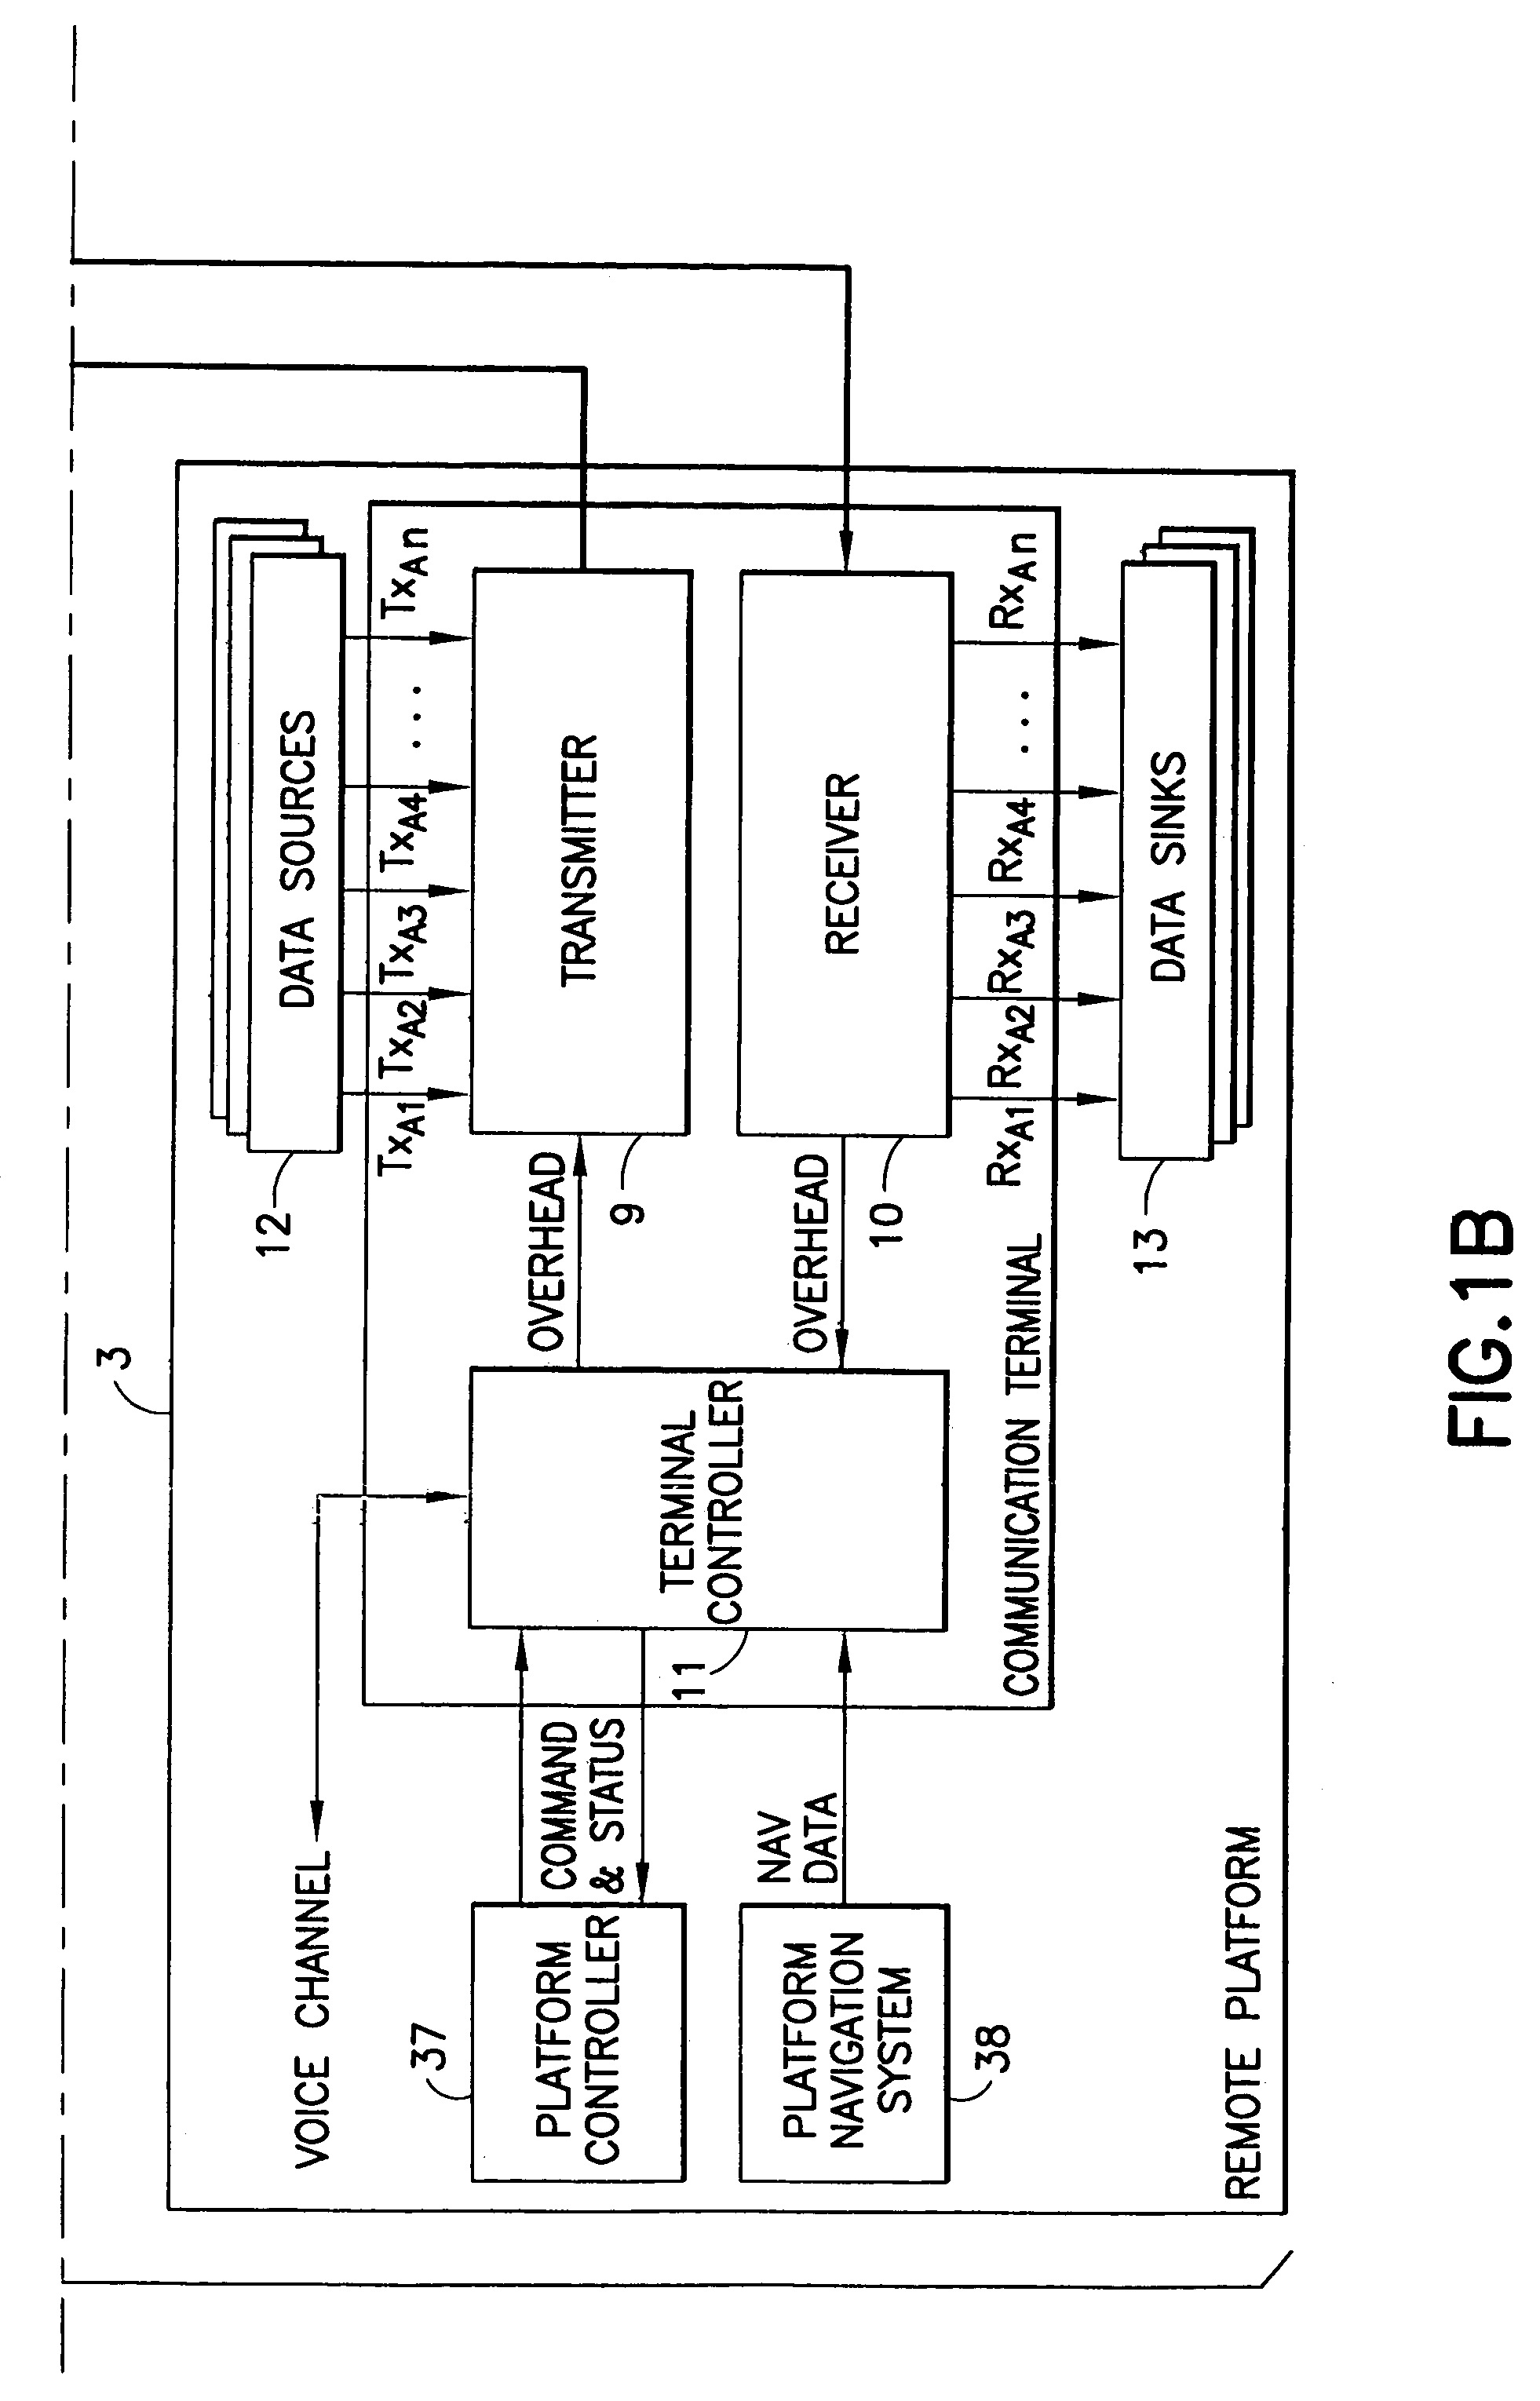 Airborne free space optical communication apparatus and method with subcarrier multiplexing